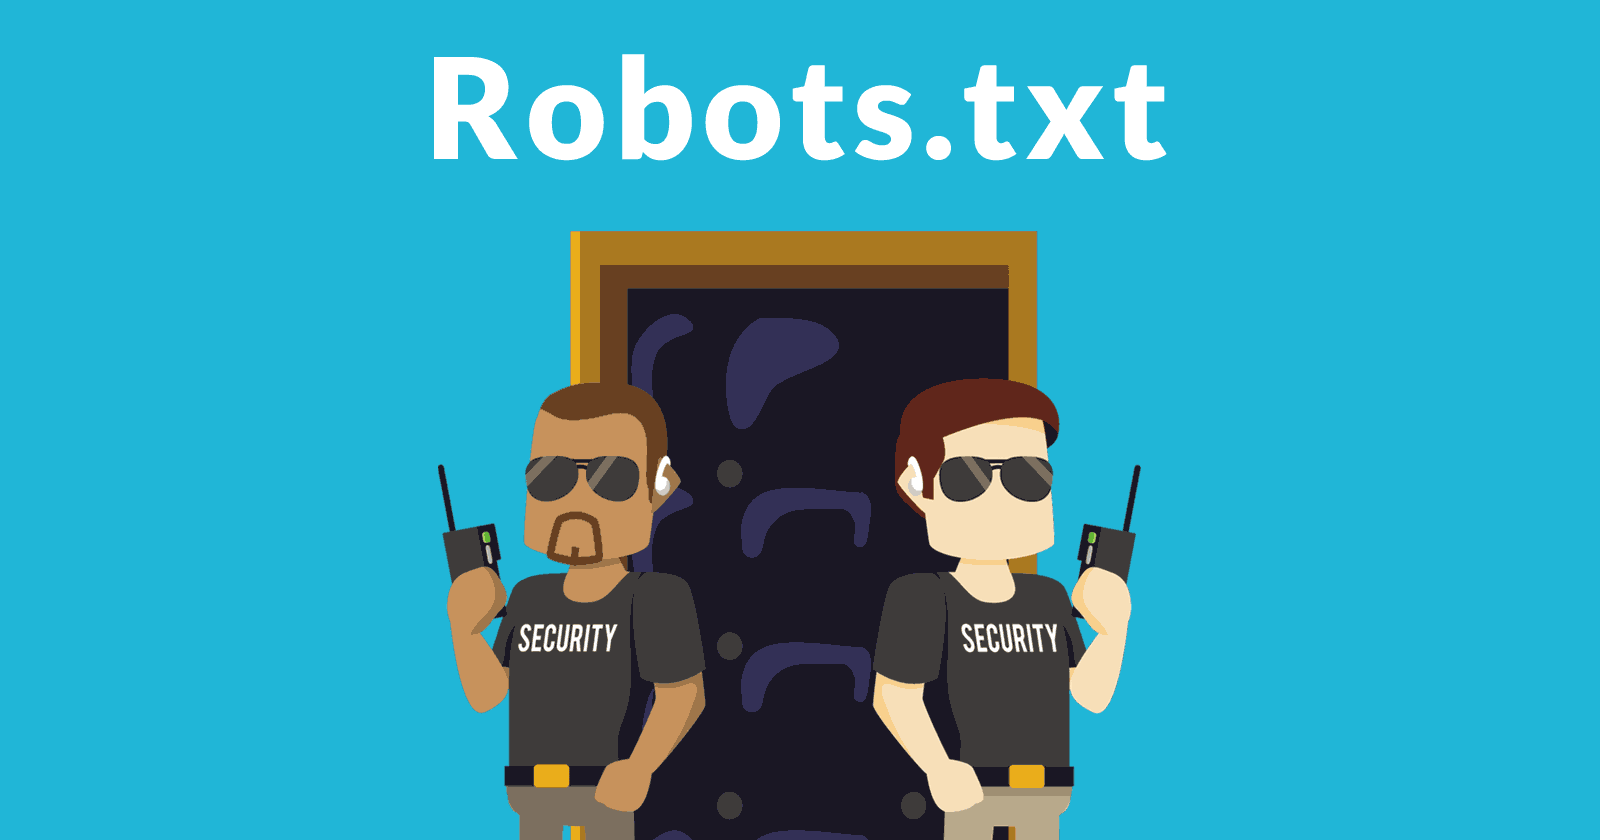 Image of two security guards representing a robots.txt document blocking certain web pages from being crawled. The words Robots.txt is written above the image.